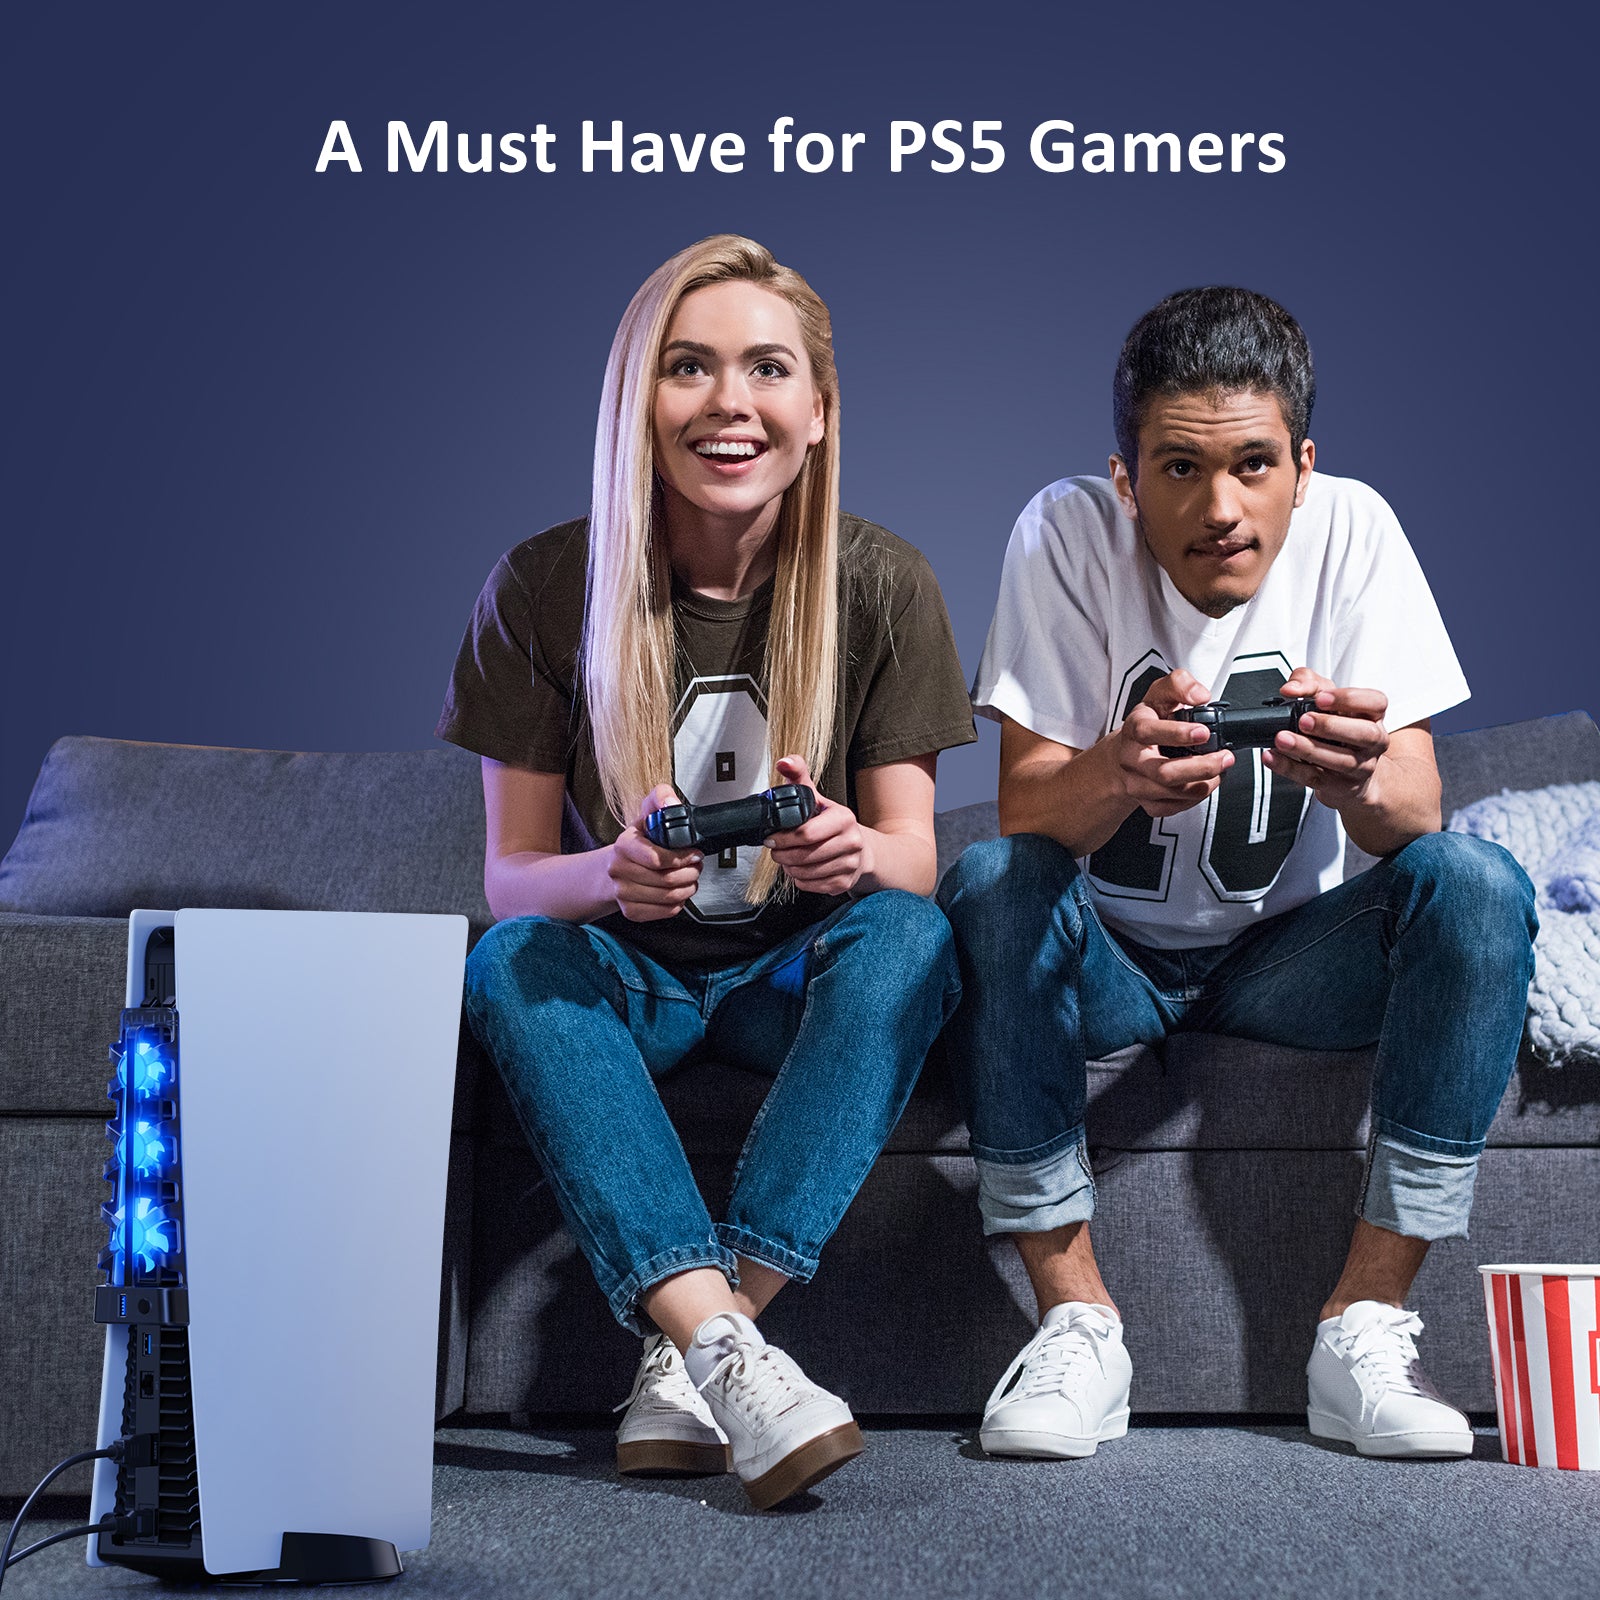 A couple is playing games on a PS5 with the cooling fan already attached.